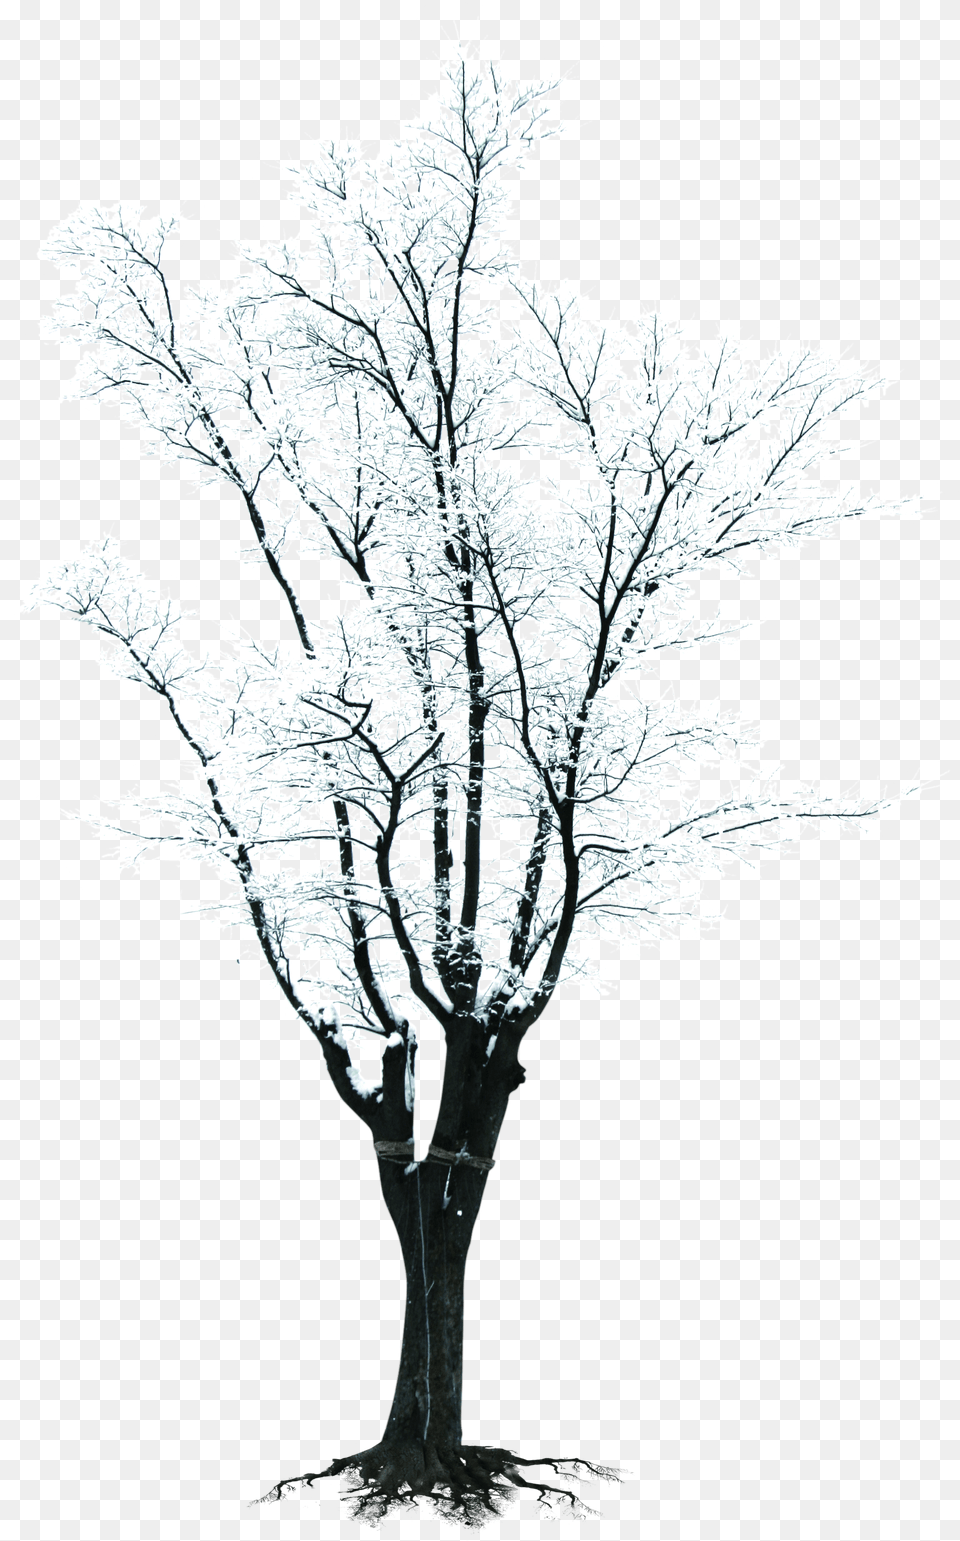 Black And White Tree Branch Clipart Banner Tree Branch Winter Snow Tree Clipart Free Png